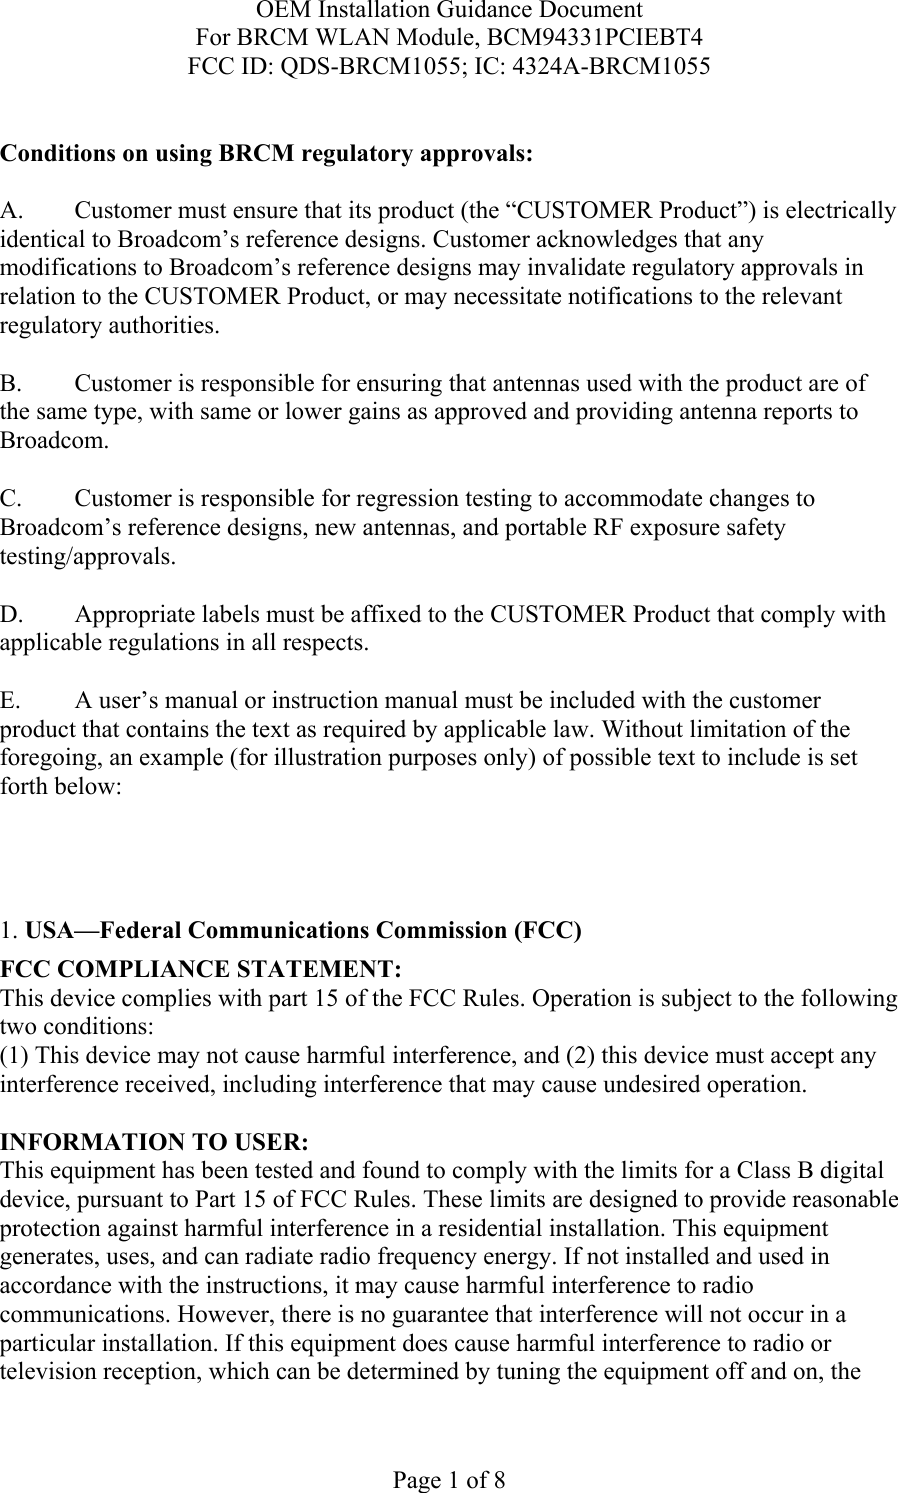 OEM Installation Guidance Document For BRCM WLAN Module, BCM94331PCIEBT4 FCC ID: QDS-BRCM1055; IC: 4324A-BRCM1055  Page 1 of 8  Conditions on using BRCM regulatory approvals:   A.  Customer must ensure that its product (the “CUSTOMER Product”) is electrically identical to Broadcom’s reference designs. Customer acknowledges that any modifications to Broadcom’s reference designs may invalidate regulatory approvals in relation to the CUSTOMER Product, or may necessitate notifications to the relevant regulatory authorities.  B.   Customer is responsible for ensuring that antennas used with the product are of the same type, with same or lower gains as approved and providing antenna reports to Broadcom.  C.   Customer is responsible for regression testing to accommodate changes to Broadcom’s reference designs, new antennas, and portable RF exposure safety testing/approvals.  D.  Appropriate labels must be affixed to the CUSTOMER Product that comply with applicable regulations in all respects.    E.  A user’s manual or instruction manual must be included with the customer product that contains the text as required by applicable law. Without limitation of the foregoing, an example (for illustration purposes only) of possible text to include is set forth below:      1. USA—Federal Communications Commission (FCC) FCC COMPLIANCE STATEMENT: This device complies with part 15 of the FCC Rules. Operation is subject to the following two conditions: (1) This device may not cause harmful interference, and (2) this device must accept any interference received, including interference that may cause undesired operation.  INFORMATION TO USER: This equipment has been tested and found to comply with the limits for a Class B digital device, pursuant to Part 15 of FCC Rules. These limits are designed to provide reasonable protection against harmful interference in a residential installation. This equipment generates, uses, and can radiate radio frequency energy. If not installed and used in accordance with the instructions, it may cause harmful interference to radio communications. However, there is no guarantee that interference will not occur in a particular installation. If this equipment does cause harmful interference to radio or television reception, which can be determined by tuning the equipment off and on, the 